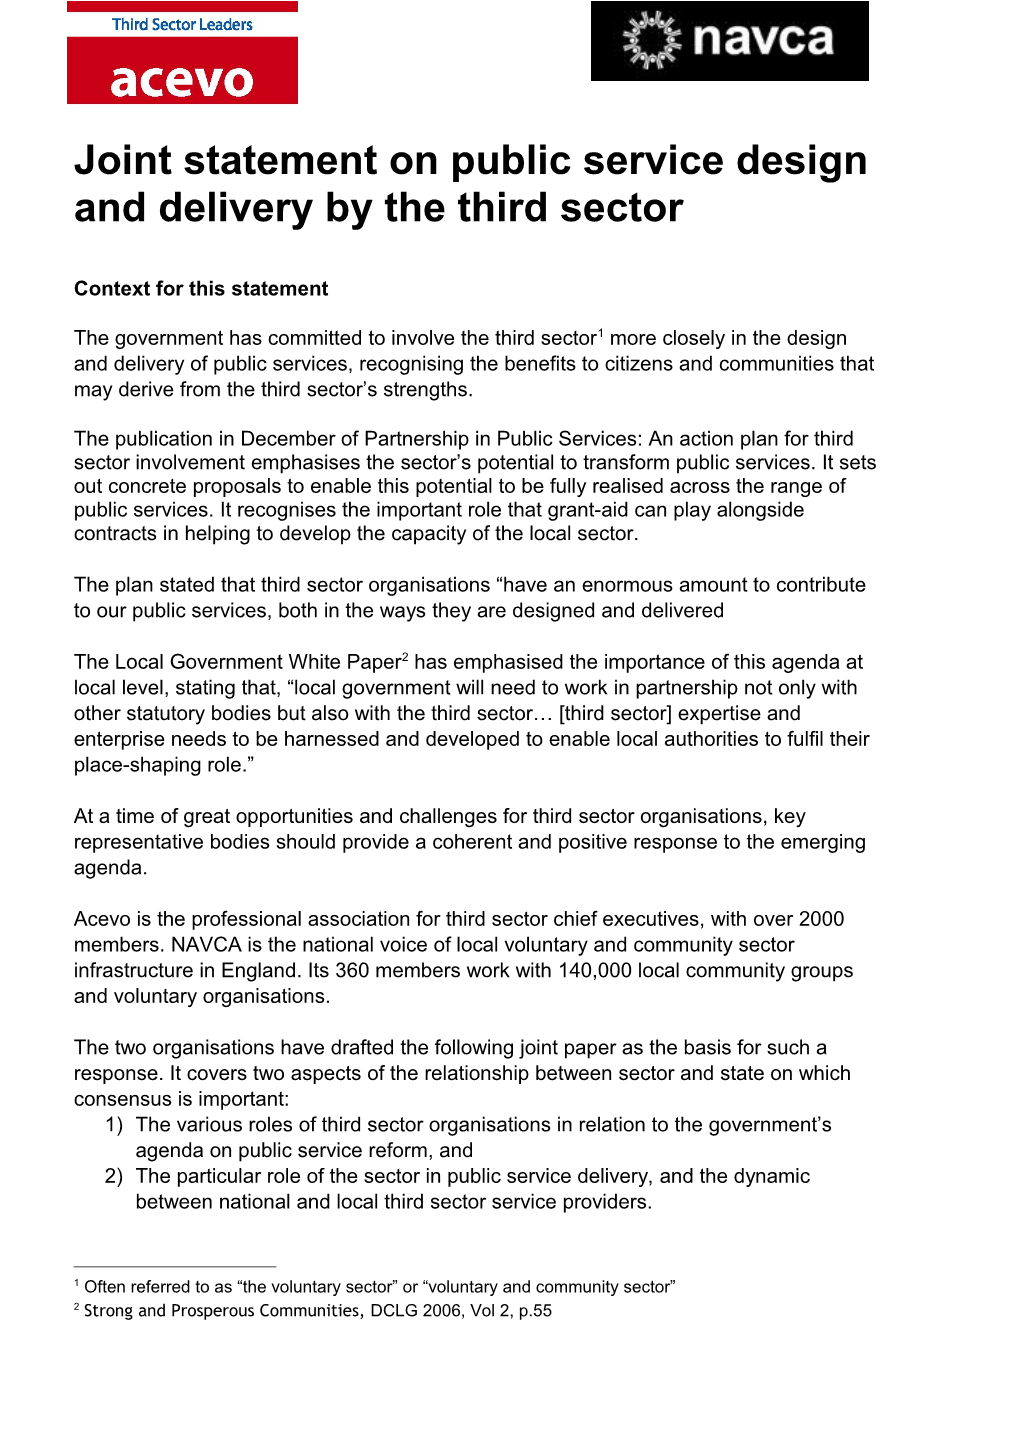 Joint Statement on Public Service Design and Delivery by the Third Sector